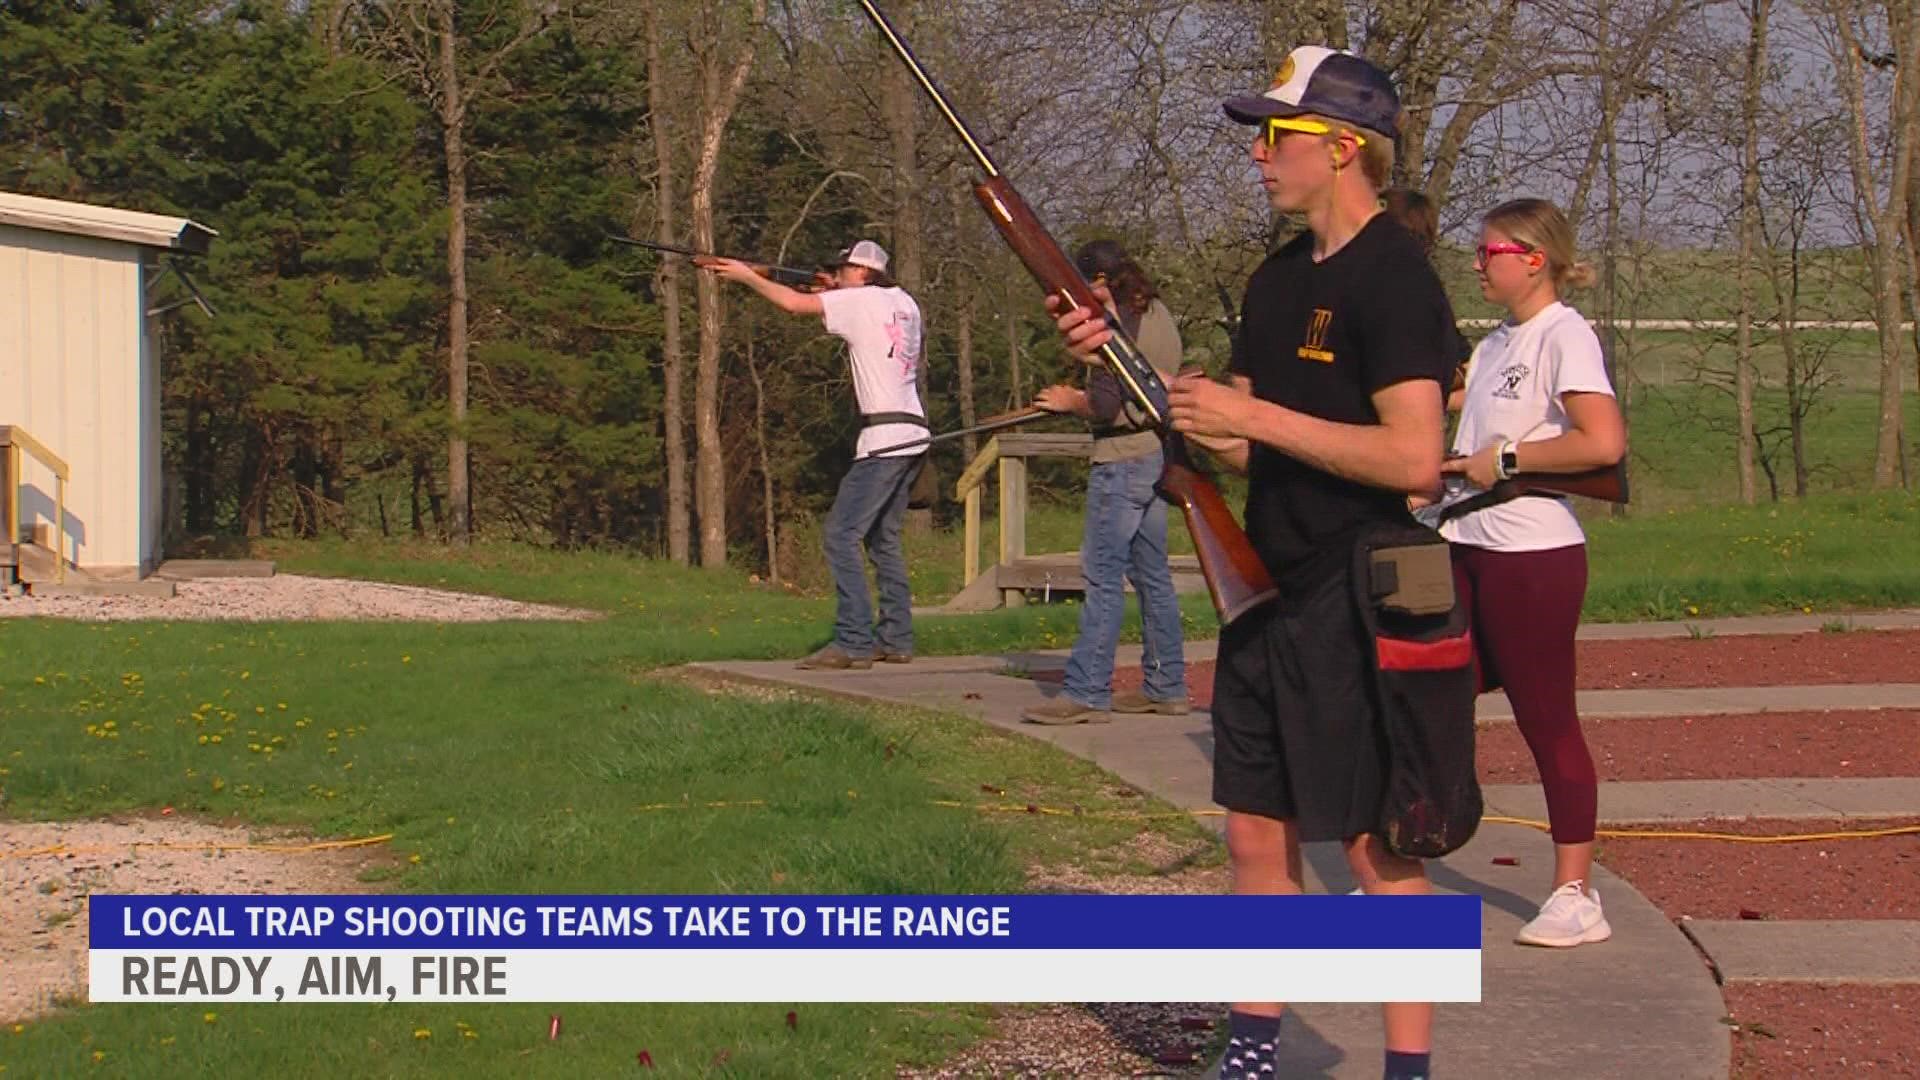 Trap shooting has become a fast-growing sport in high schools around the Iowa. But it's more than just aim, shoot, and fire.